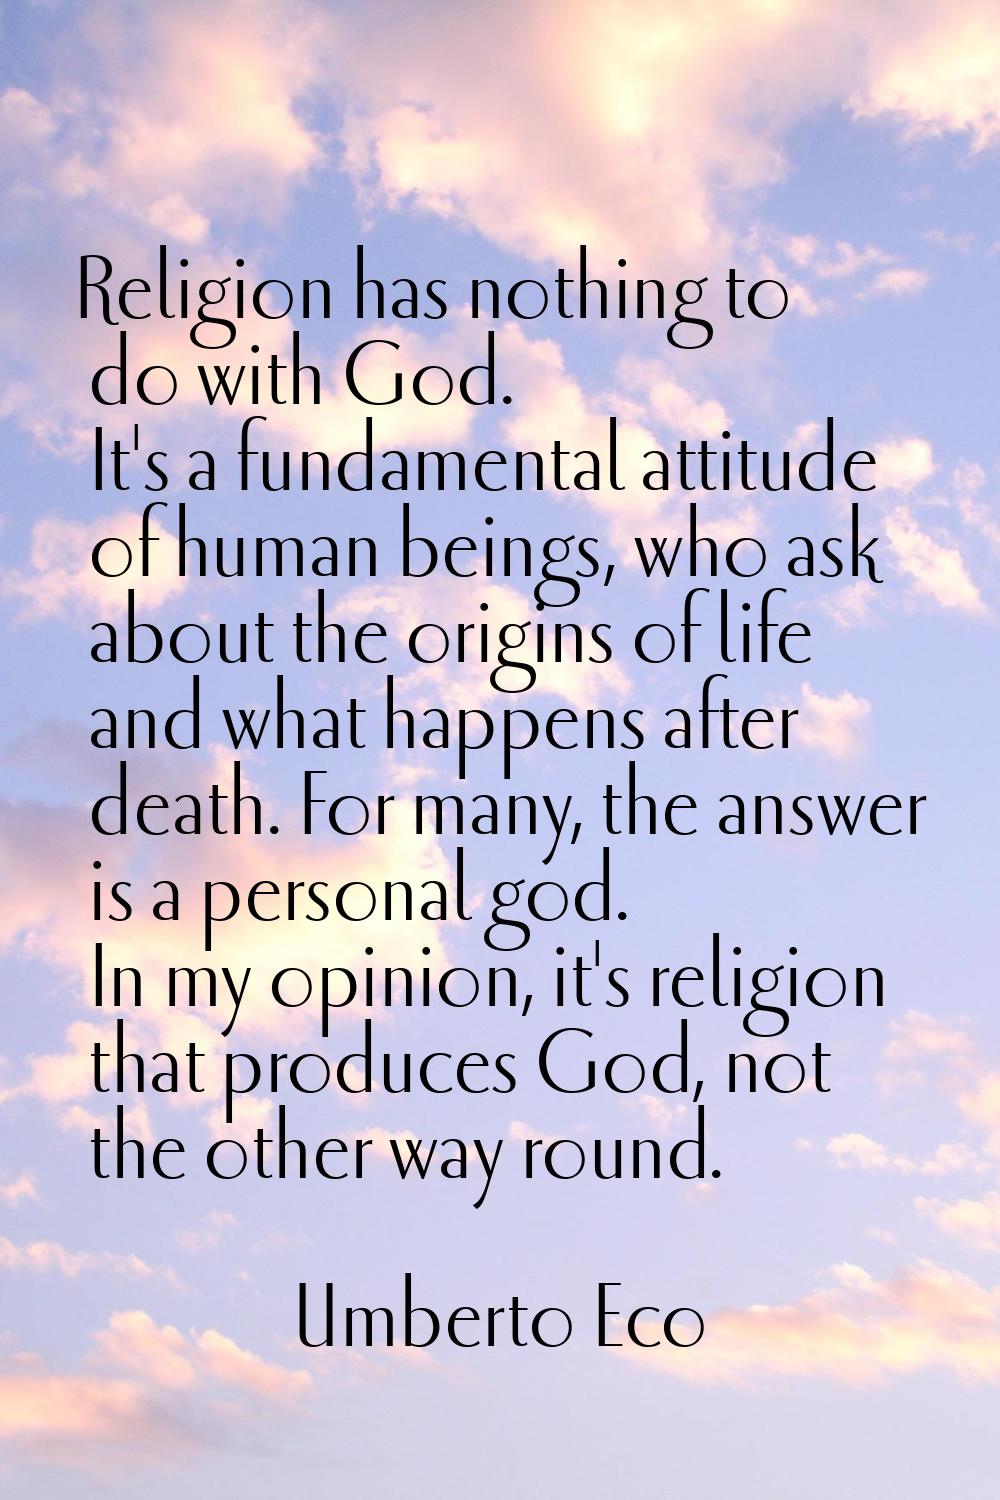 Religion has nothing to do with God. It's a fundamental attitude of human beings, who ask about the